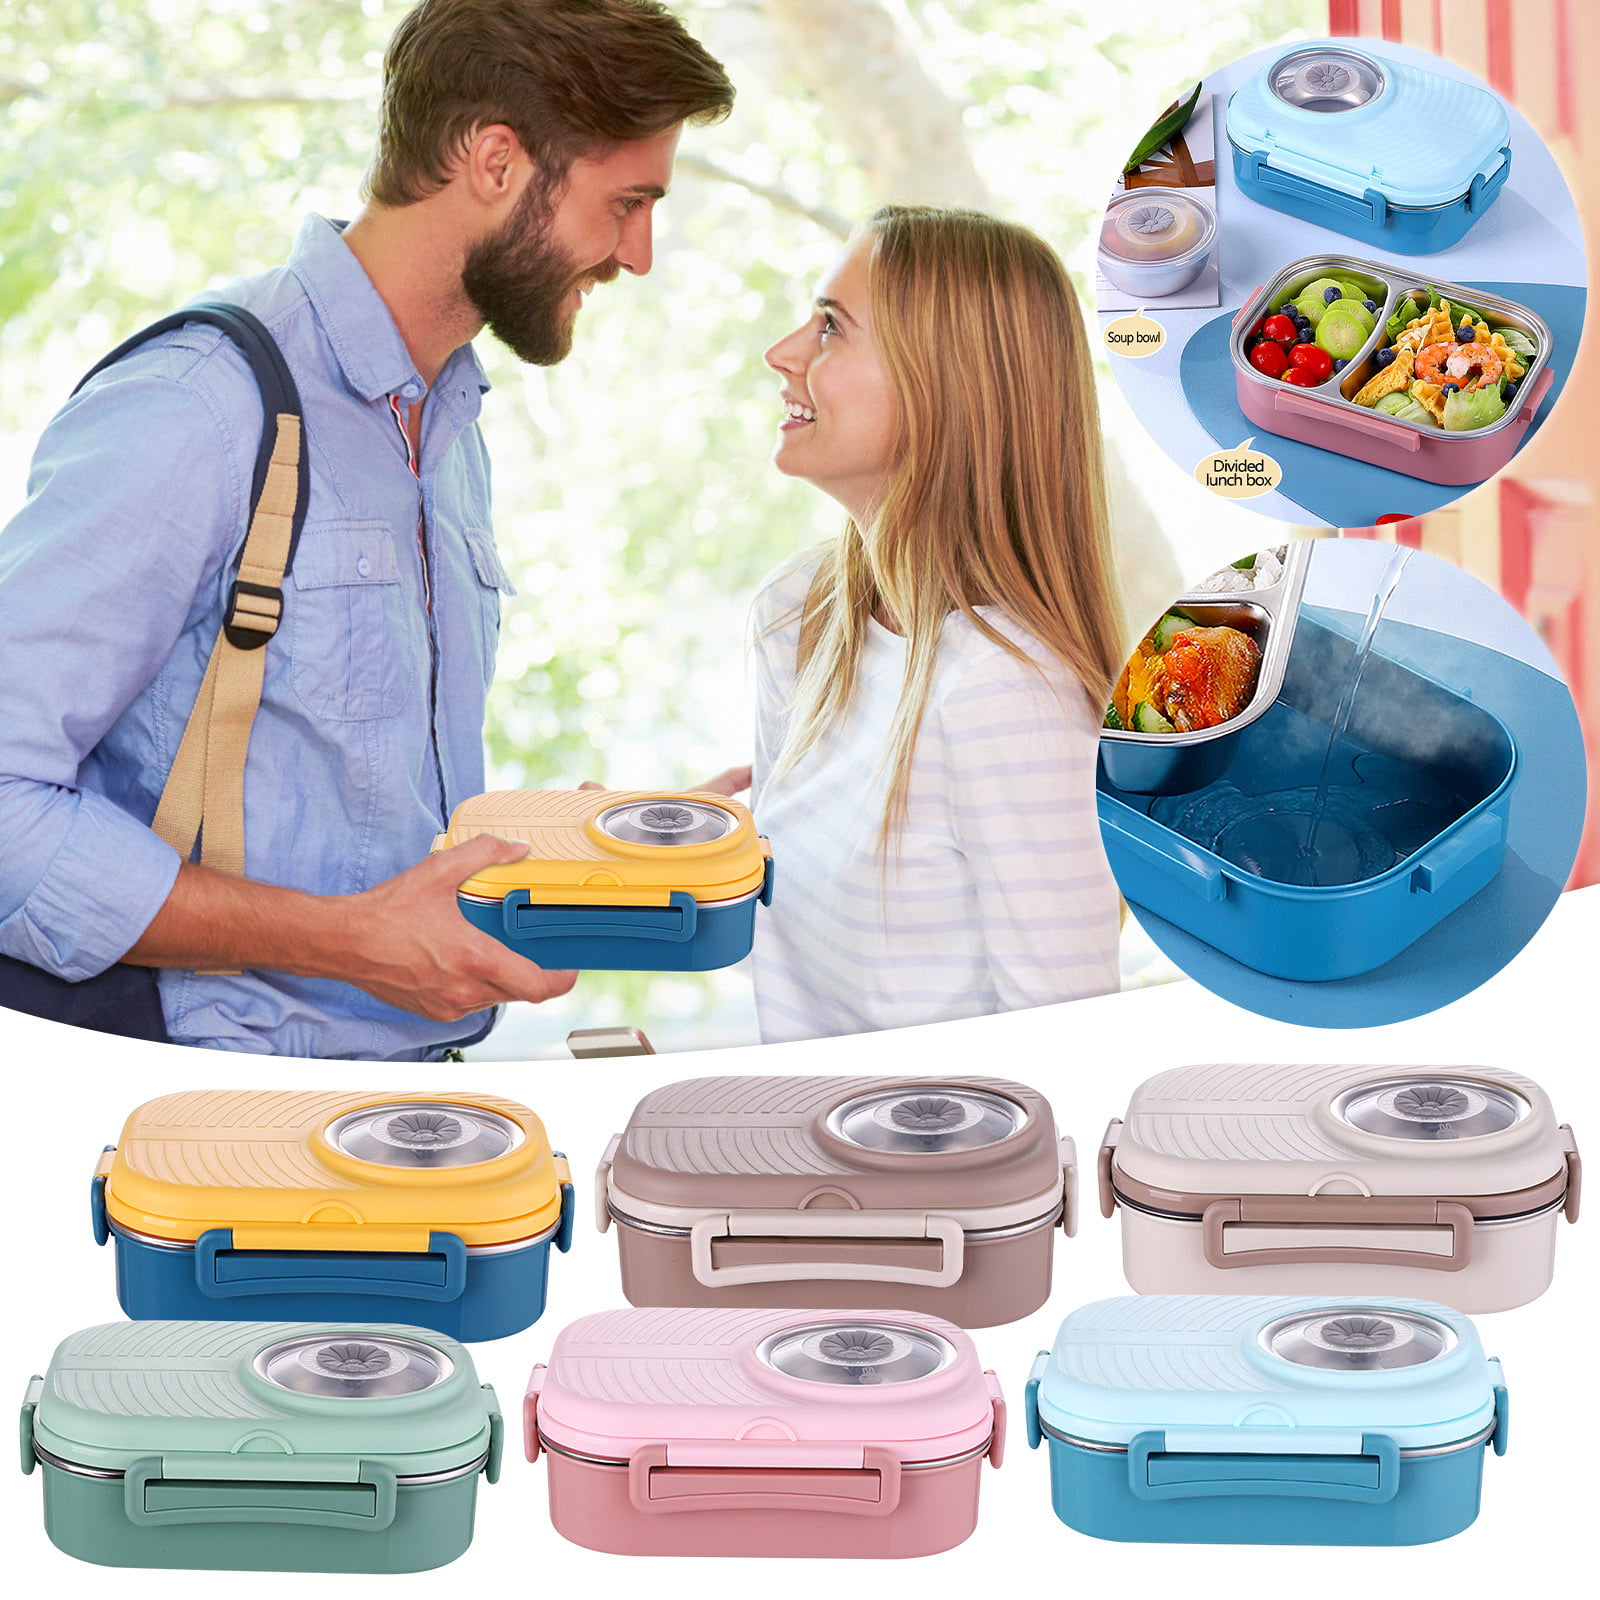 VANDHOME Portable Lunch Container For Kids School, 18/8 Stainless Steel  Thermal Bento Box Aldults Lu…See more VANDHOME Portable Lunch Container For